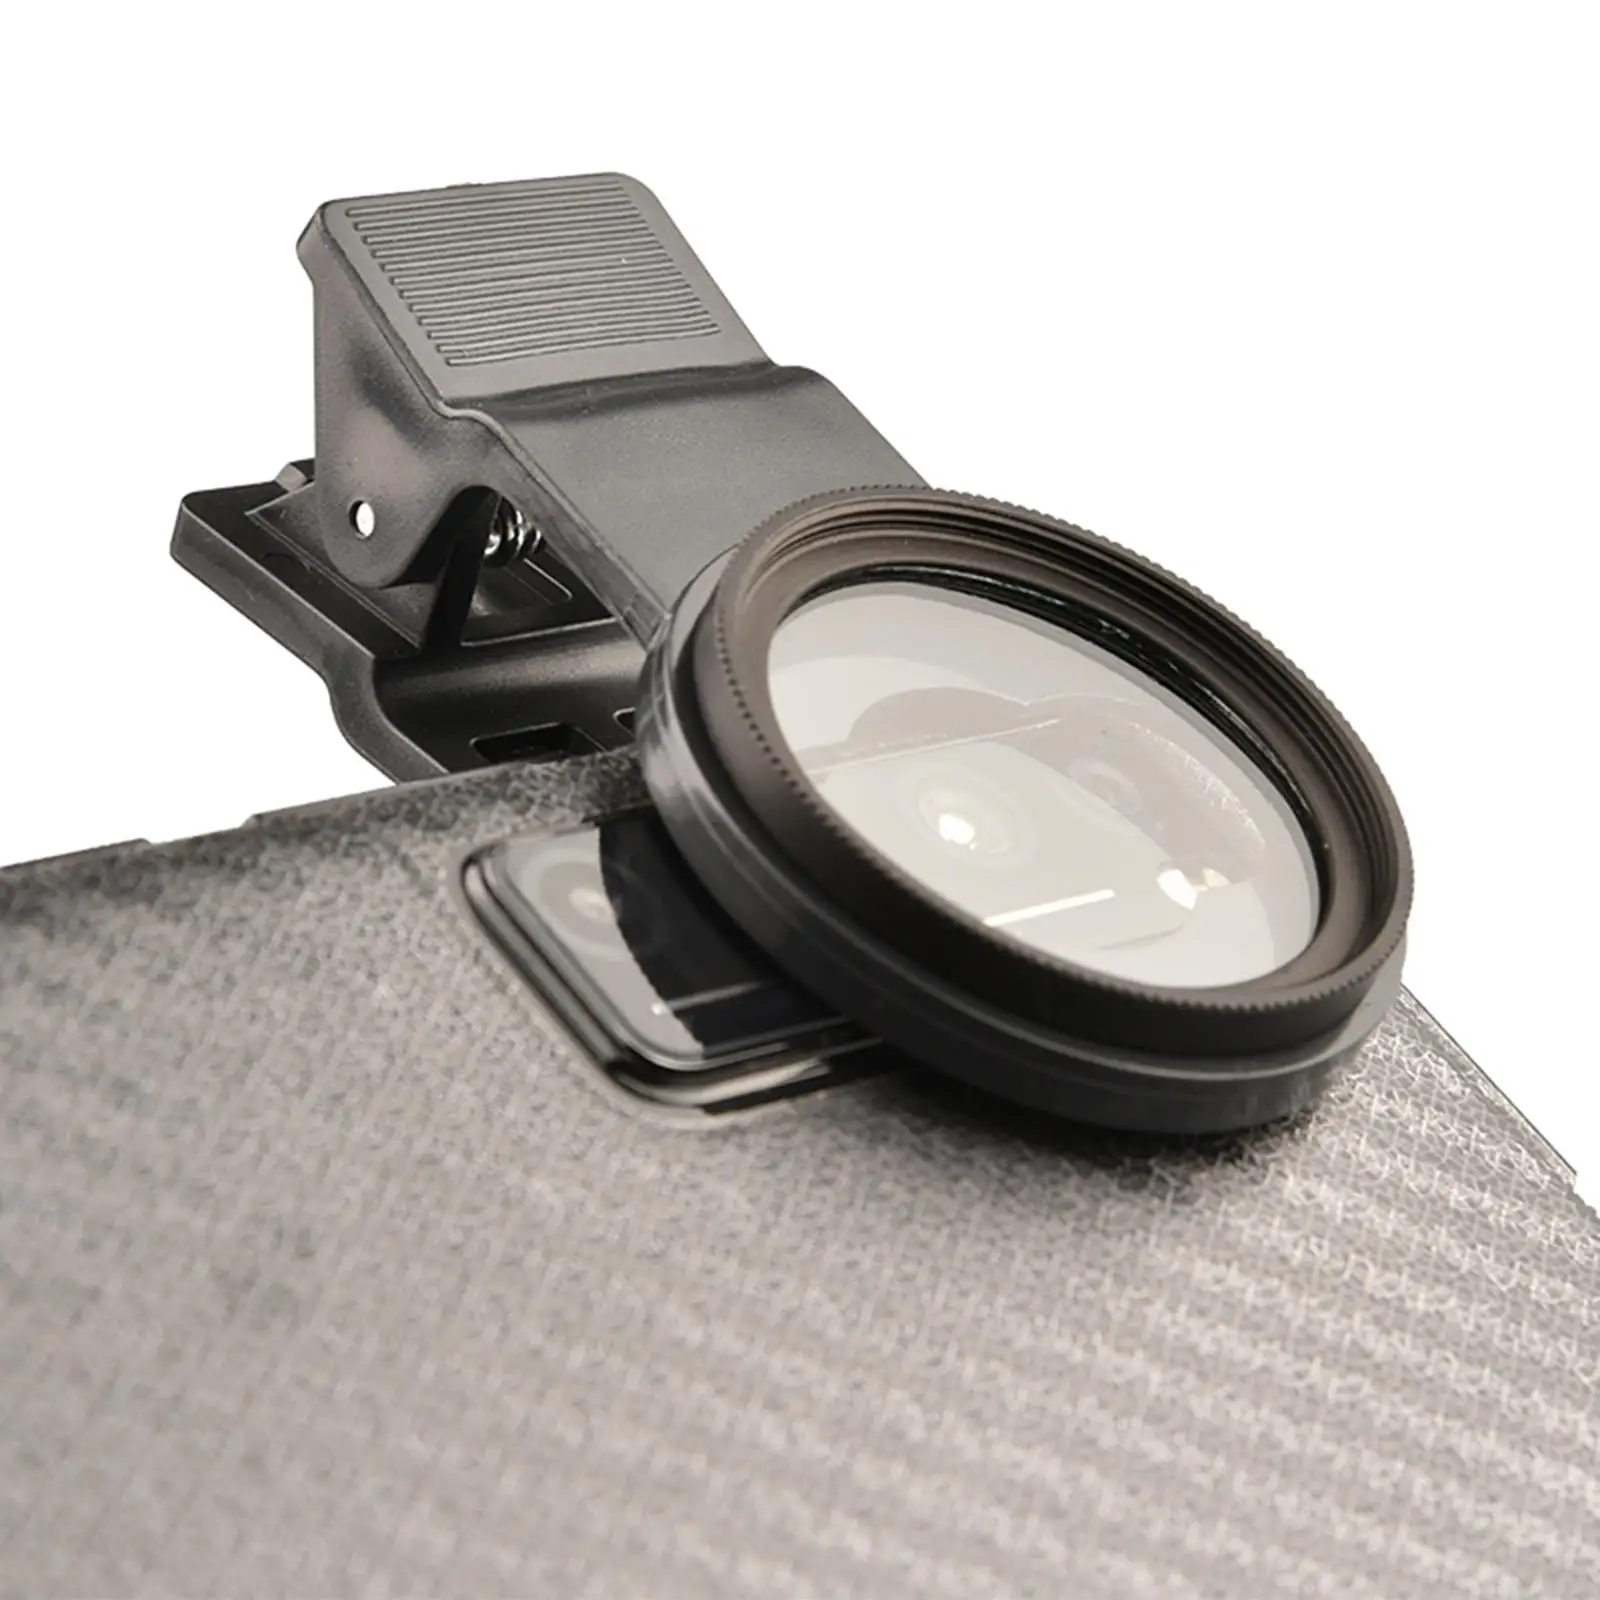 Soft Focus Lens Filter 37mm Reduces Glare Professional with Clip Soften Camera Filter for Mobile Phones Landscape Photography